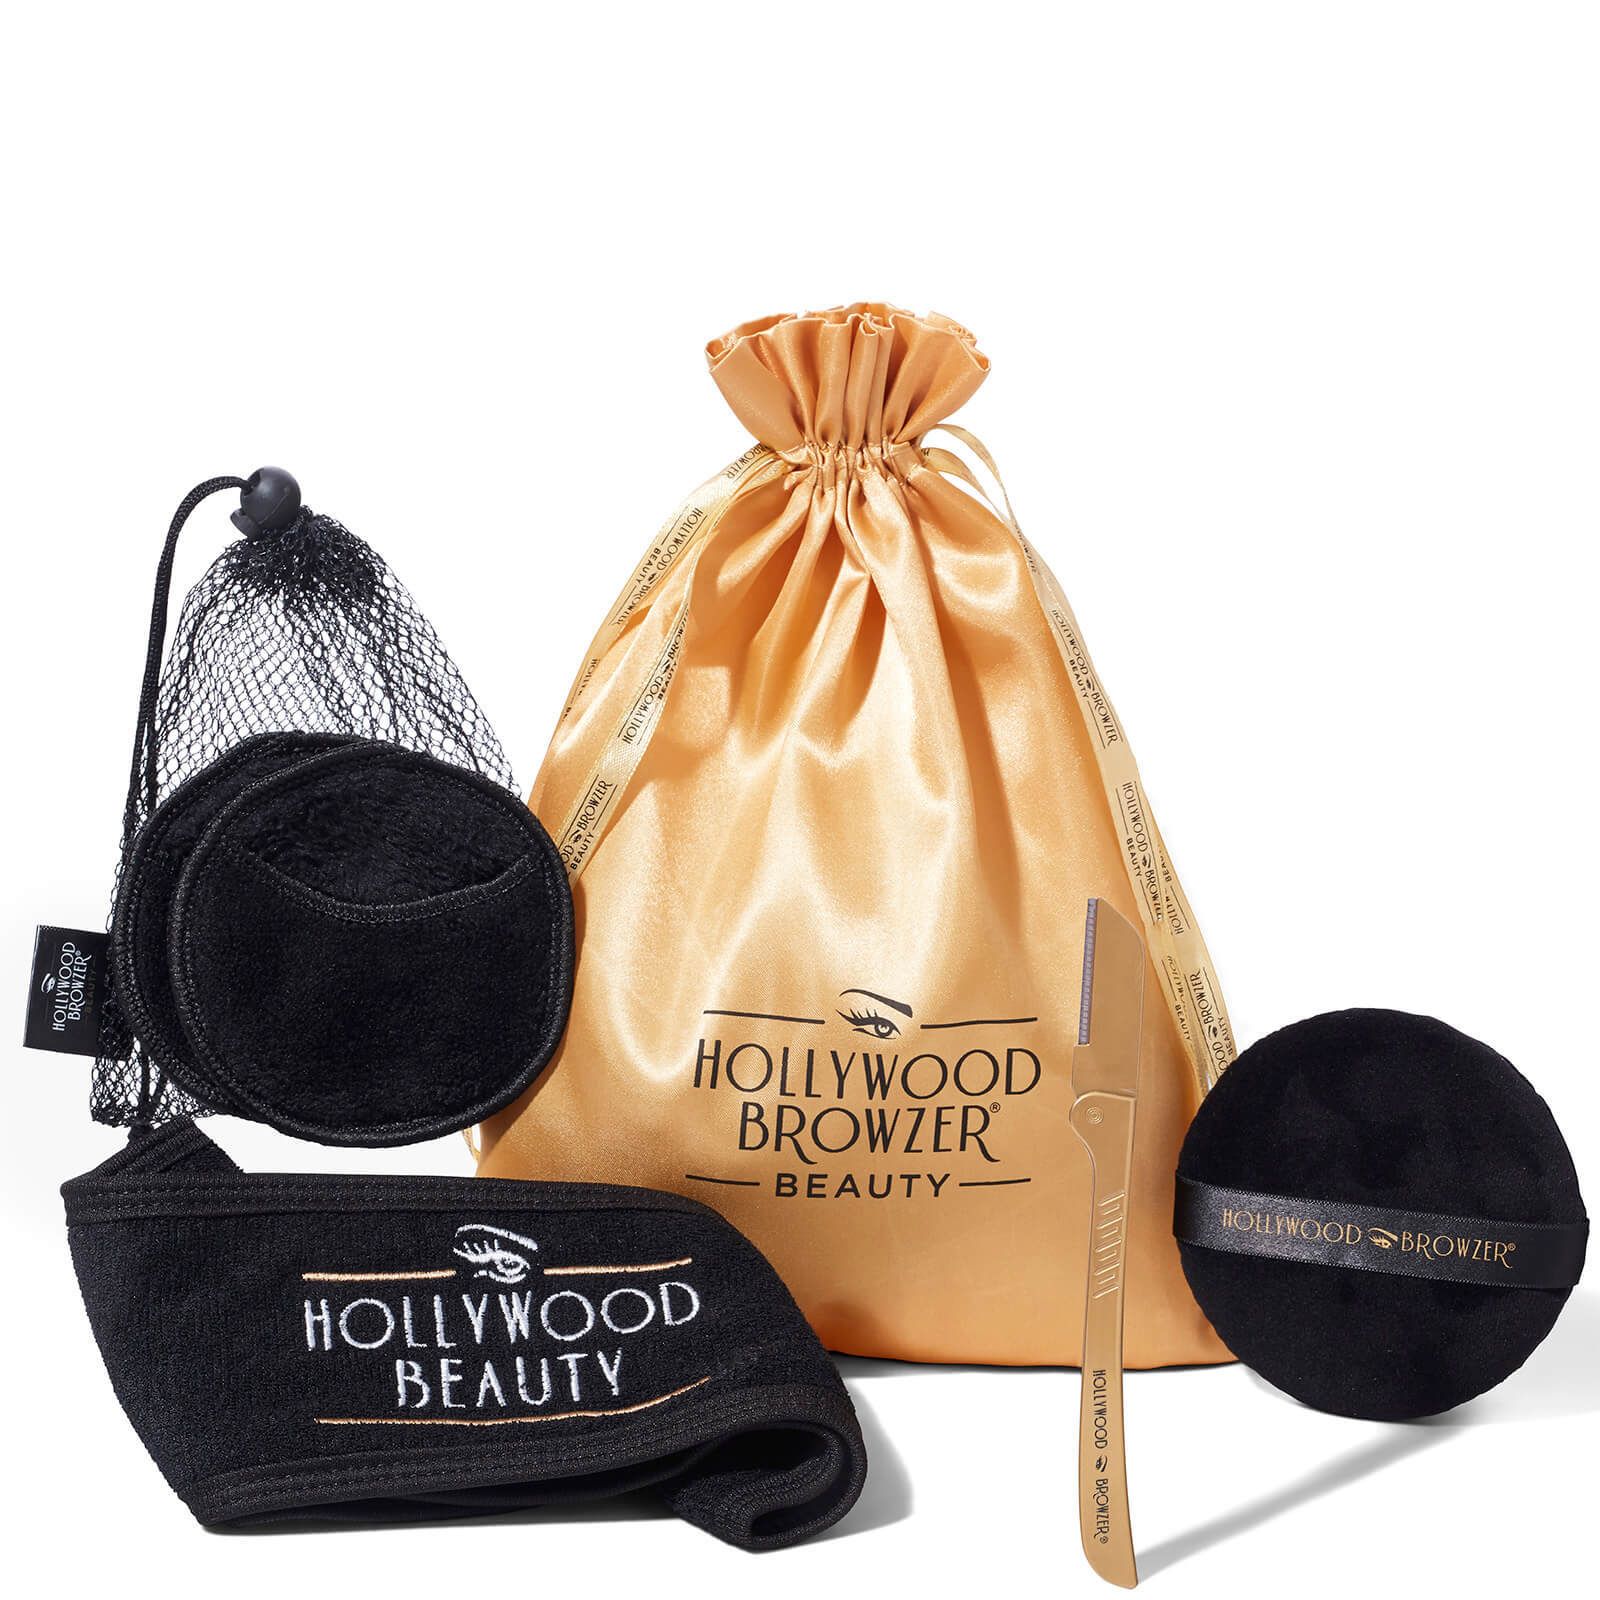 Hollywood Browzer Complete Dermaplaning Kit (Various Shades) - Gold